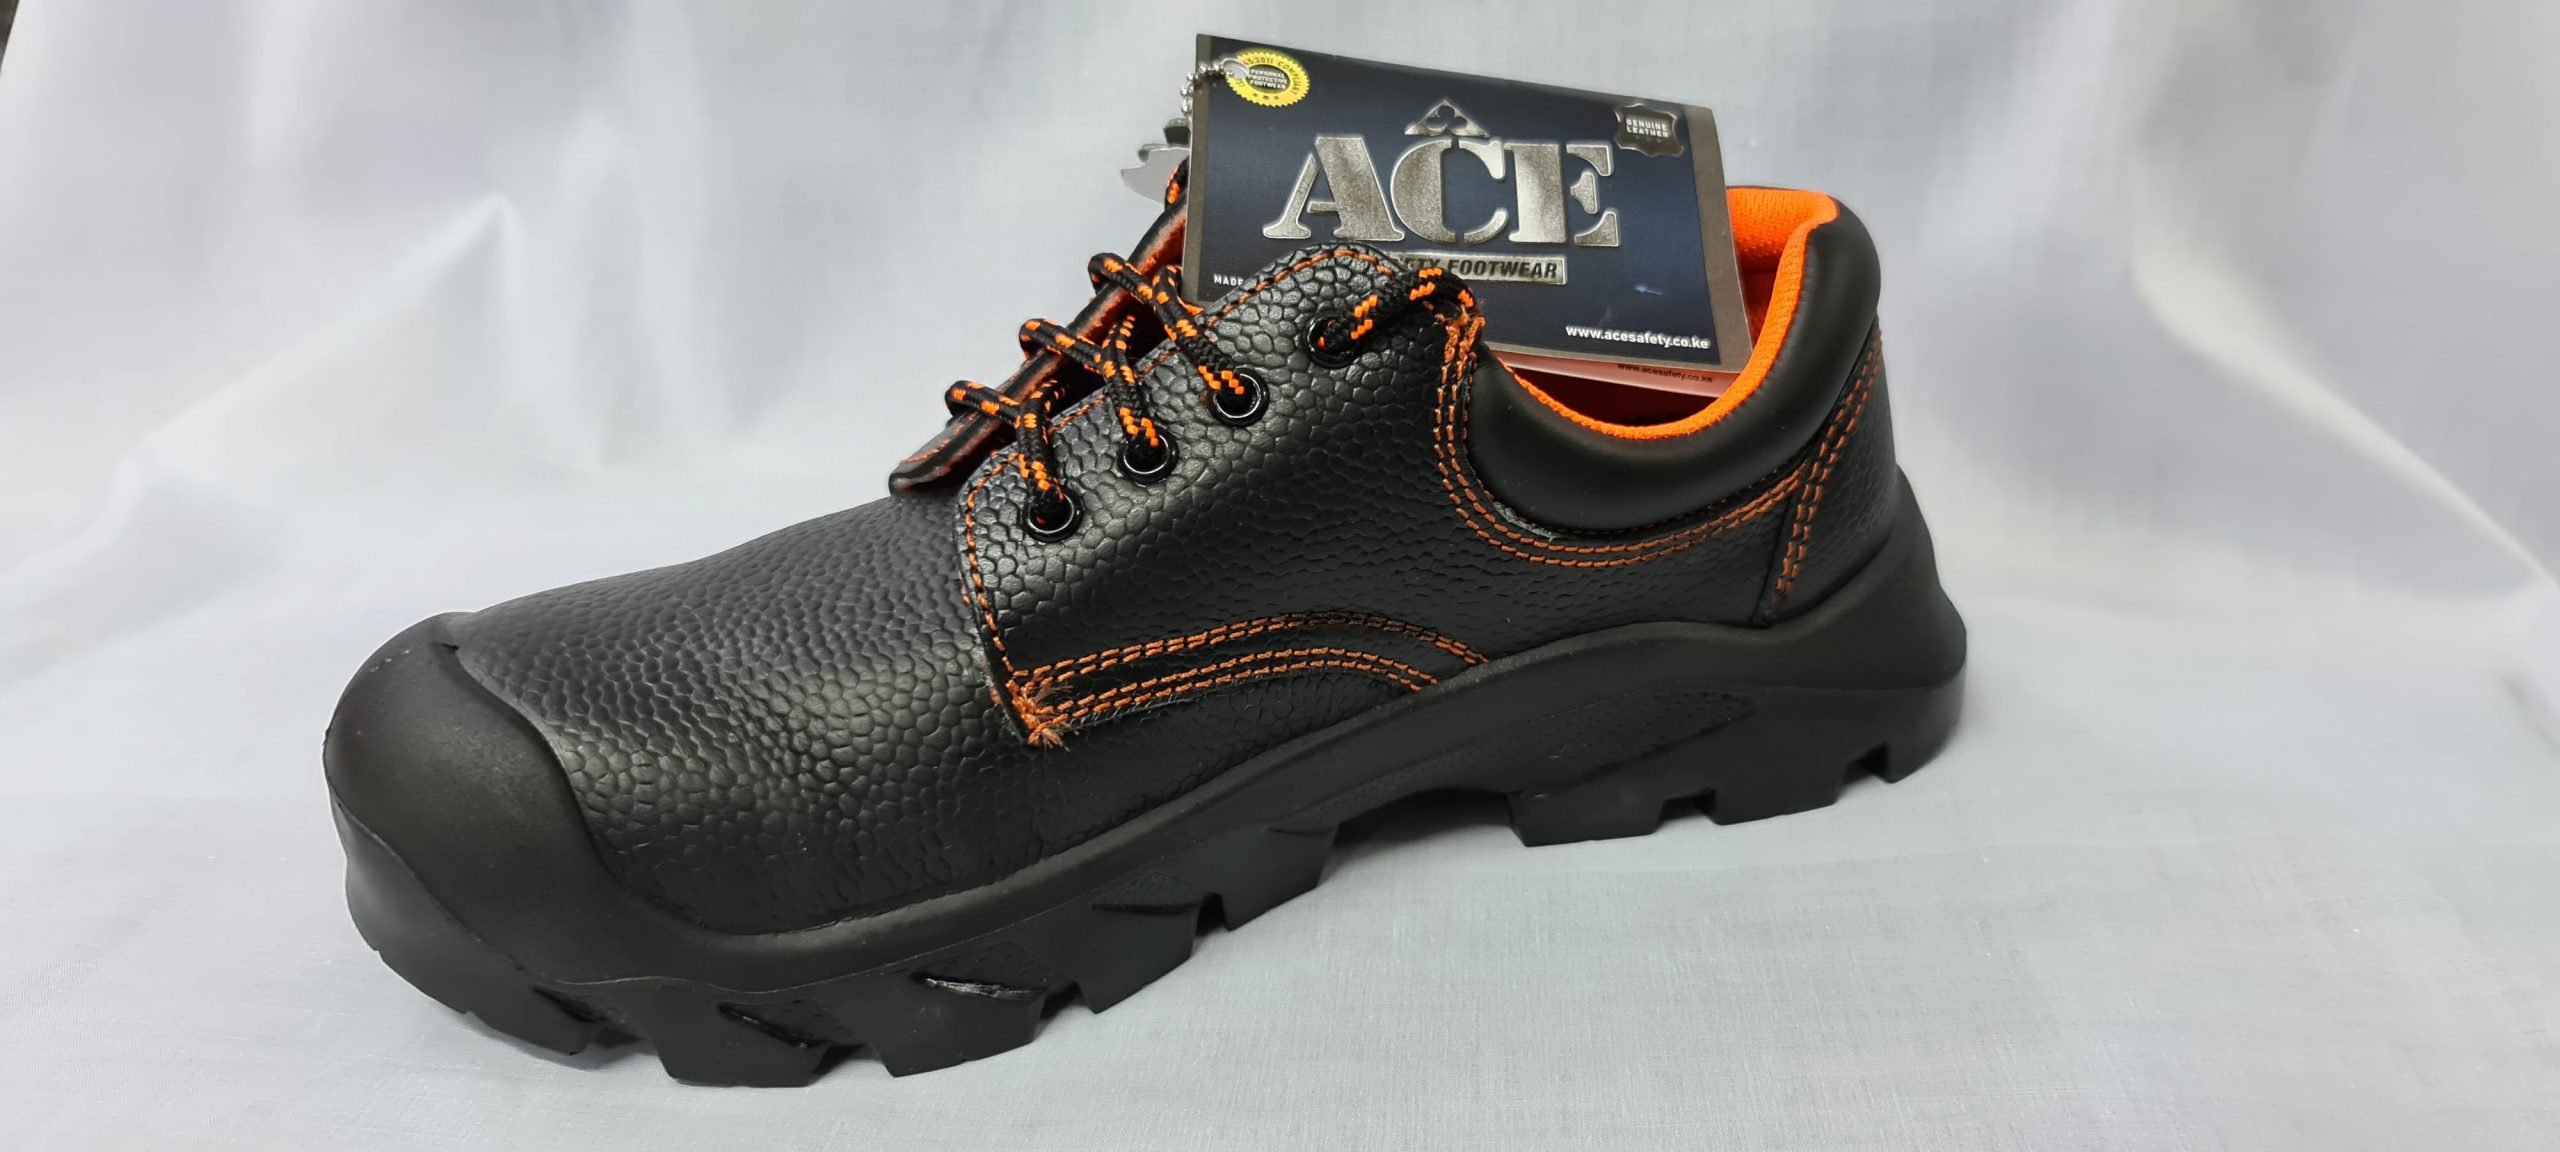 Ace Safety Boot – Low Ankle